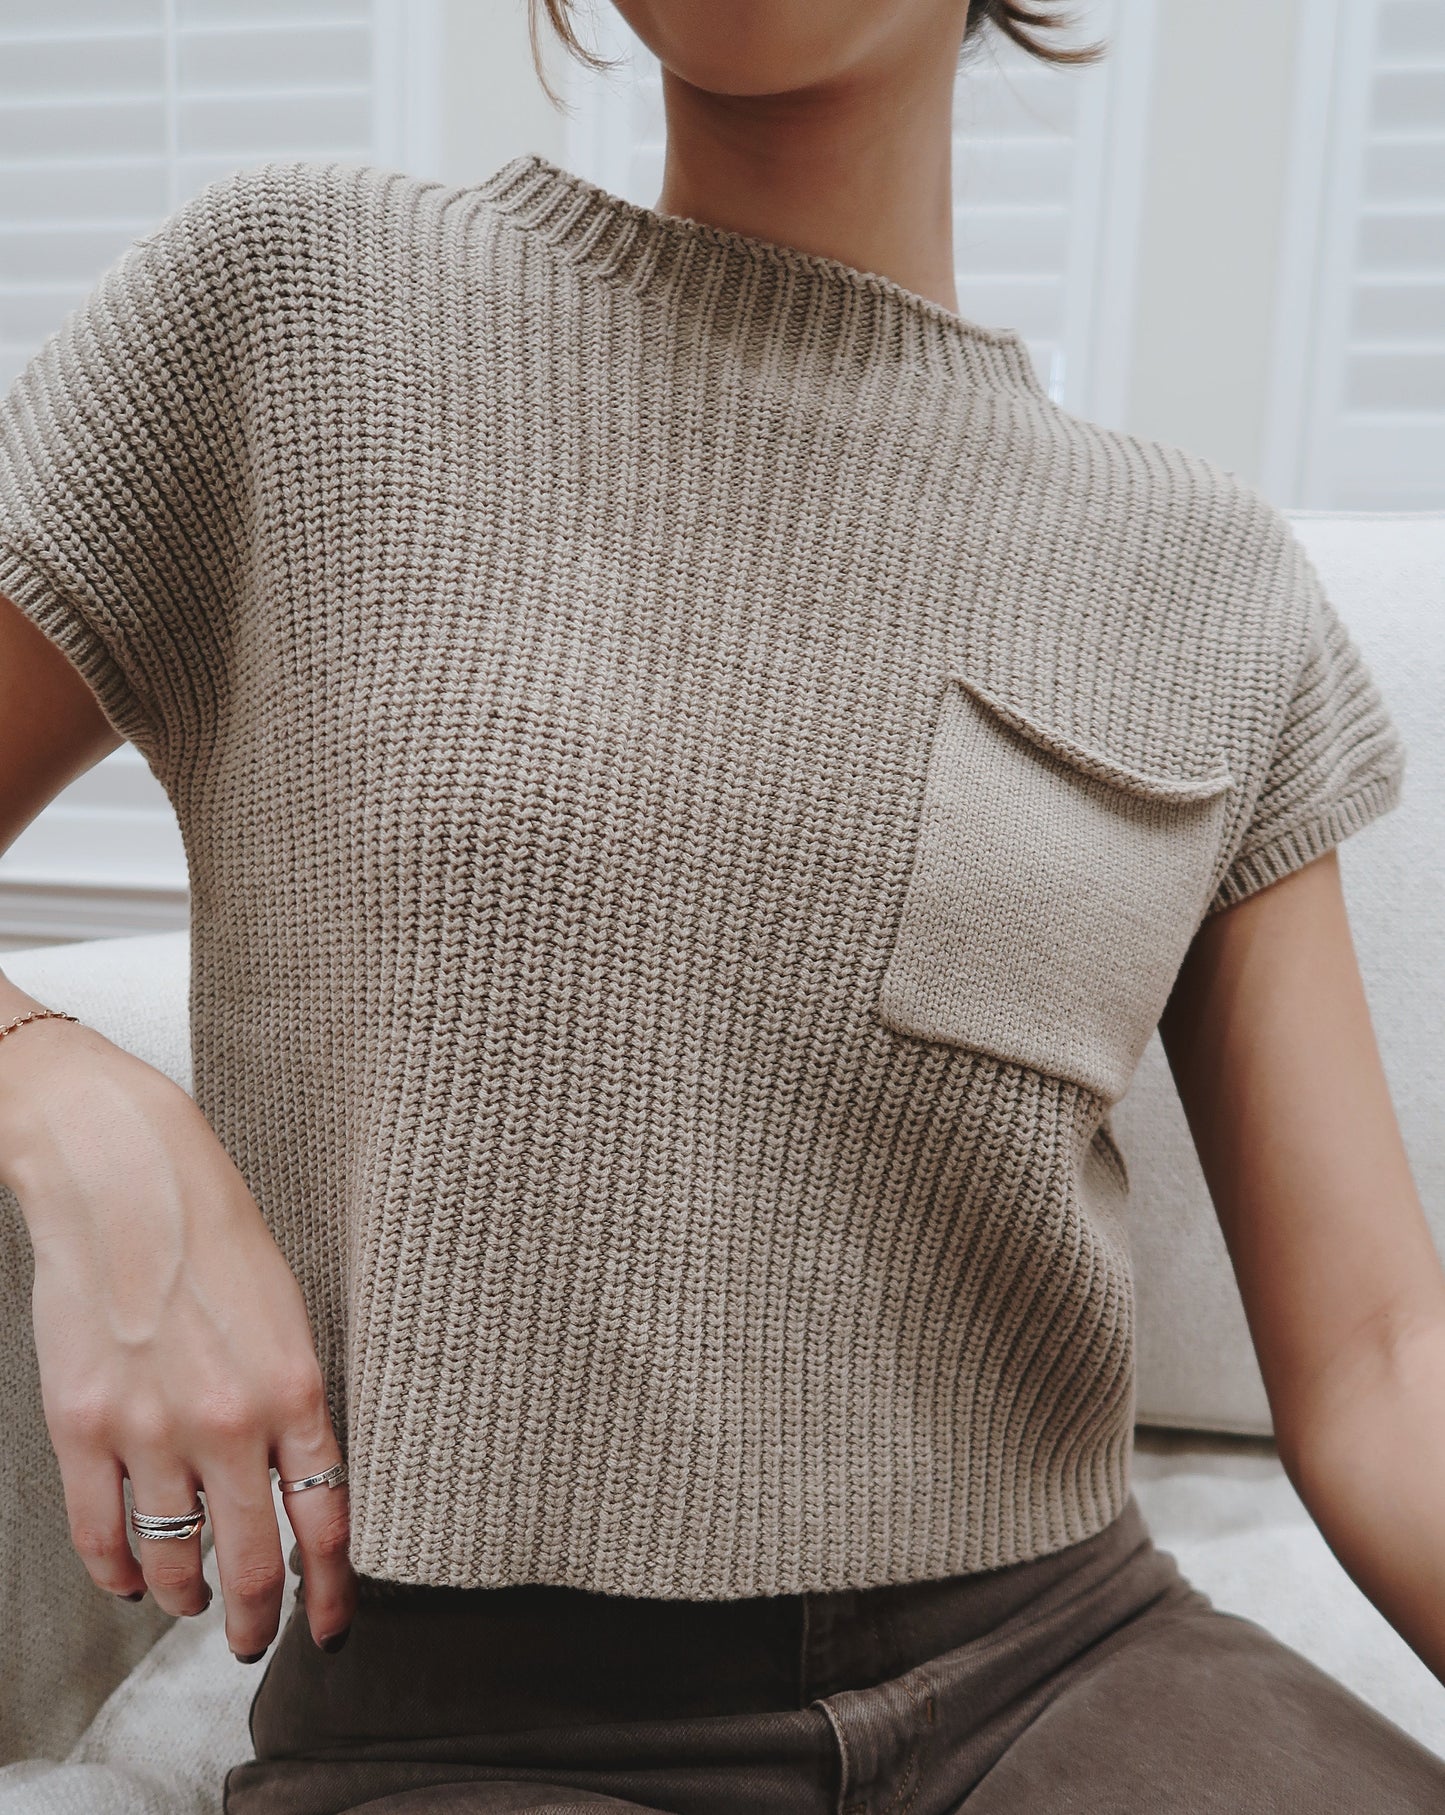 Muse Sweater Knit Top - Olive